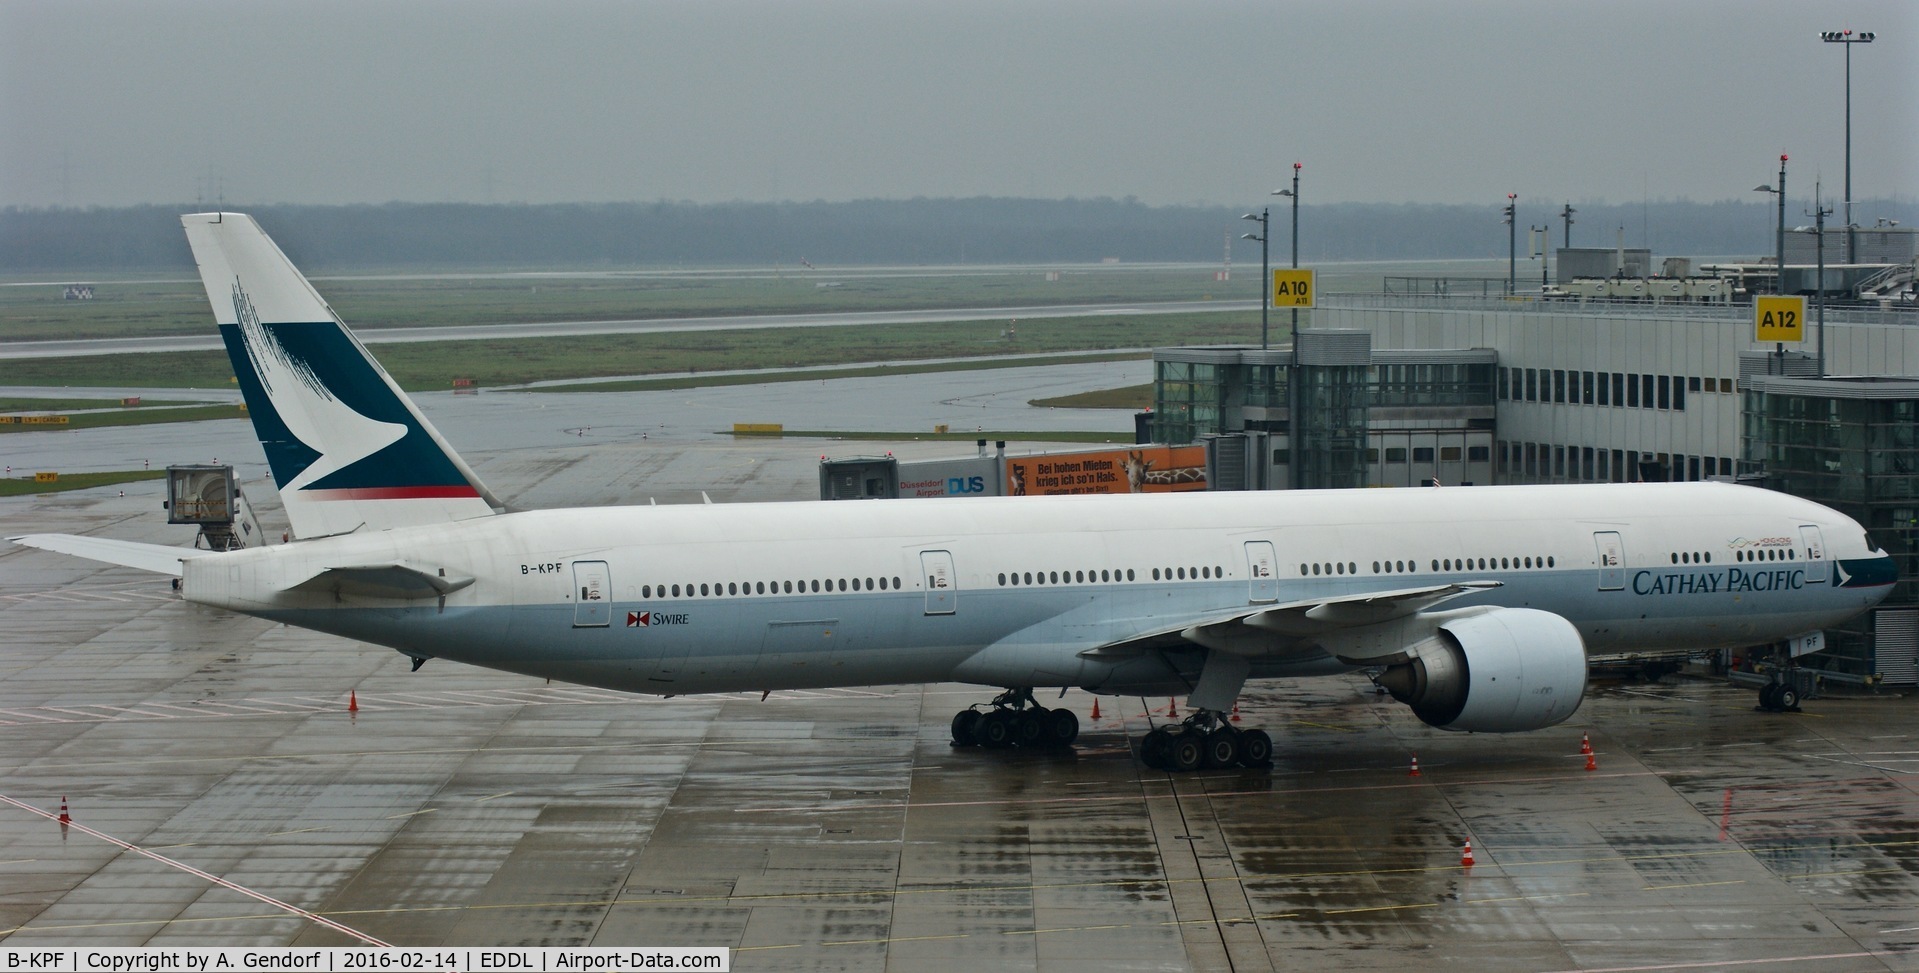 B-KPF, 2008 Boeing 777-367/ER C/N 36832/692, Cathay Pacific, is here parked at the gate at Düsseldorf Int'l(EDDL)